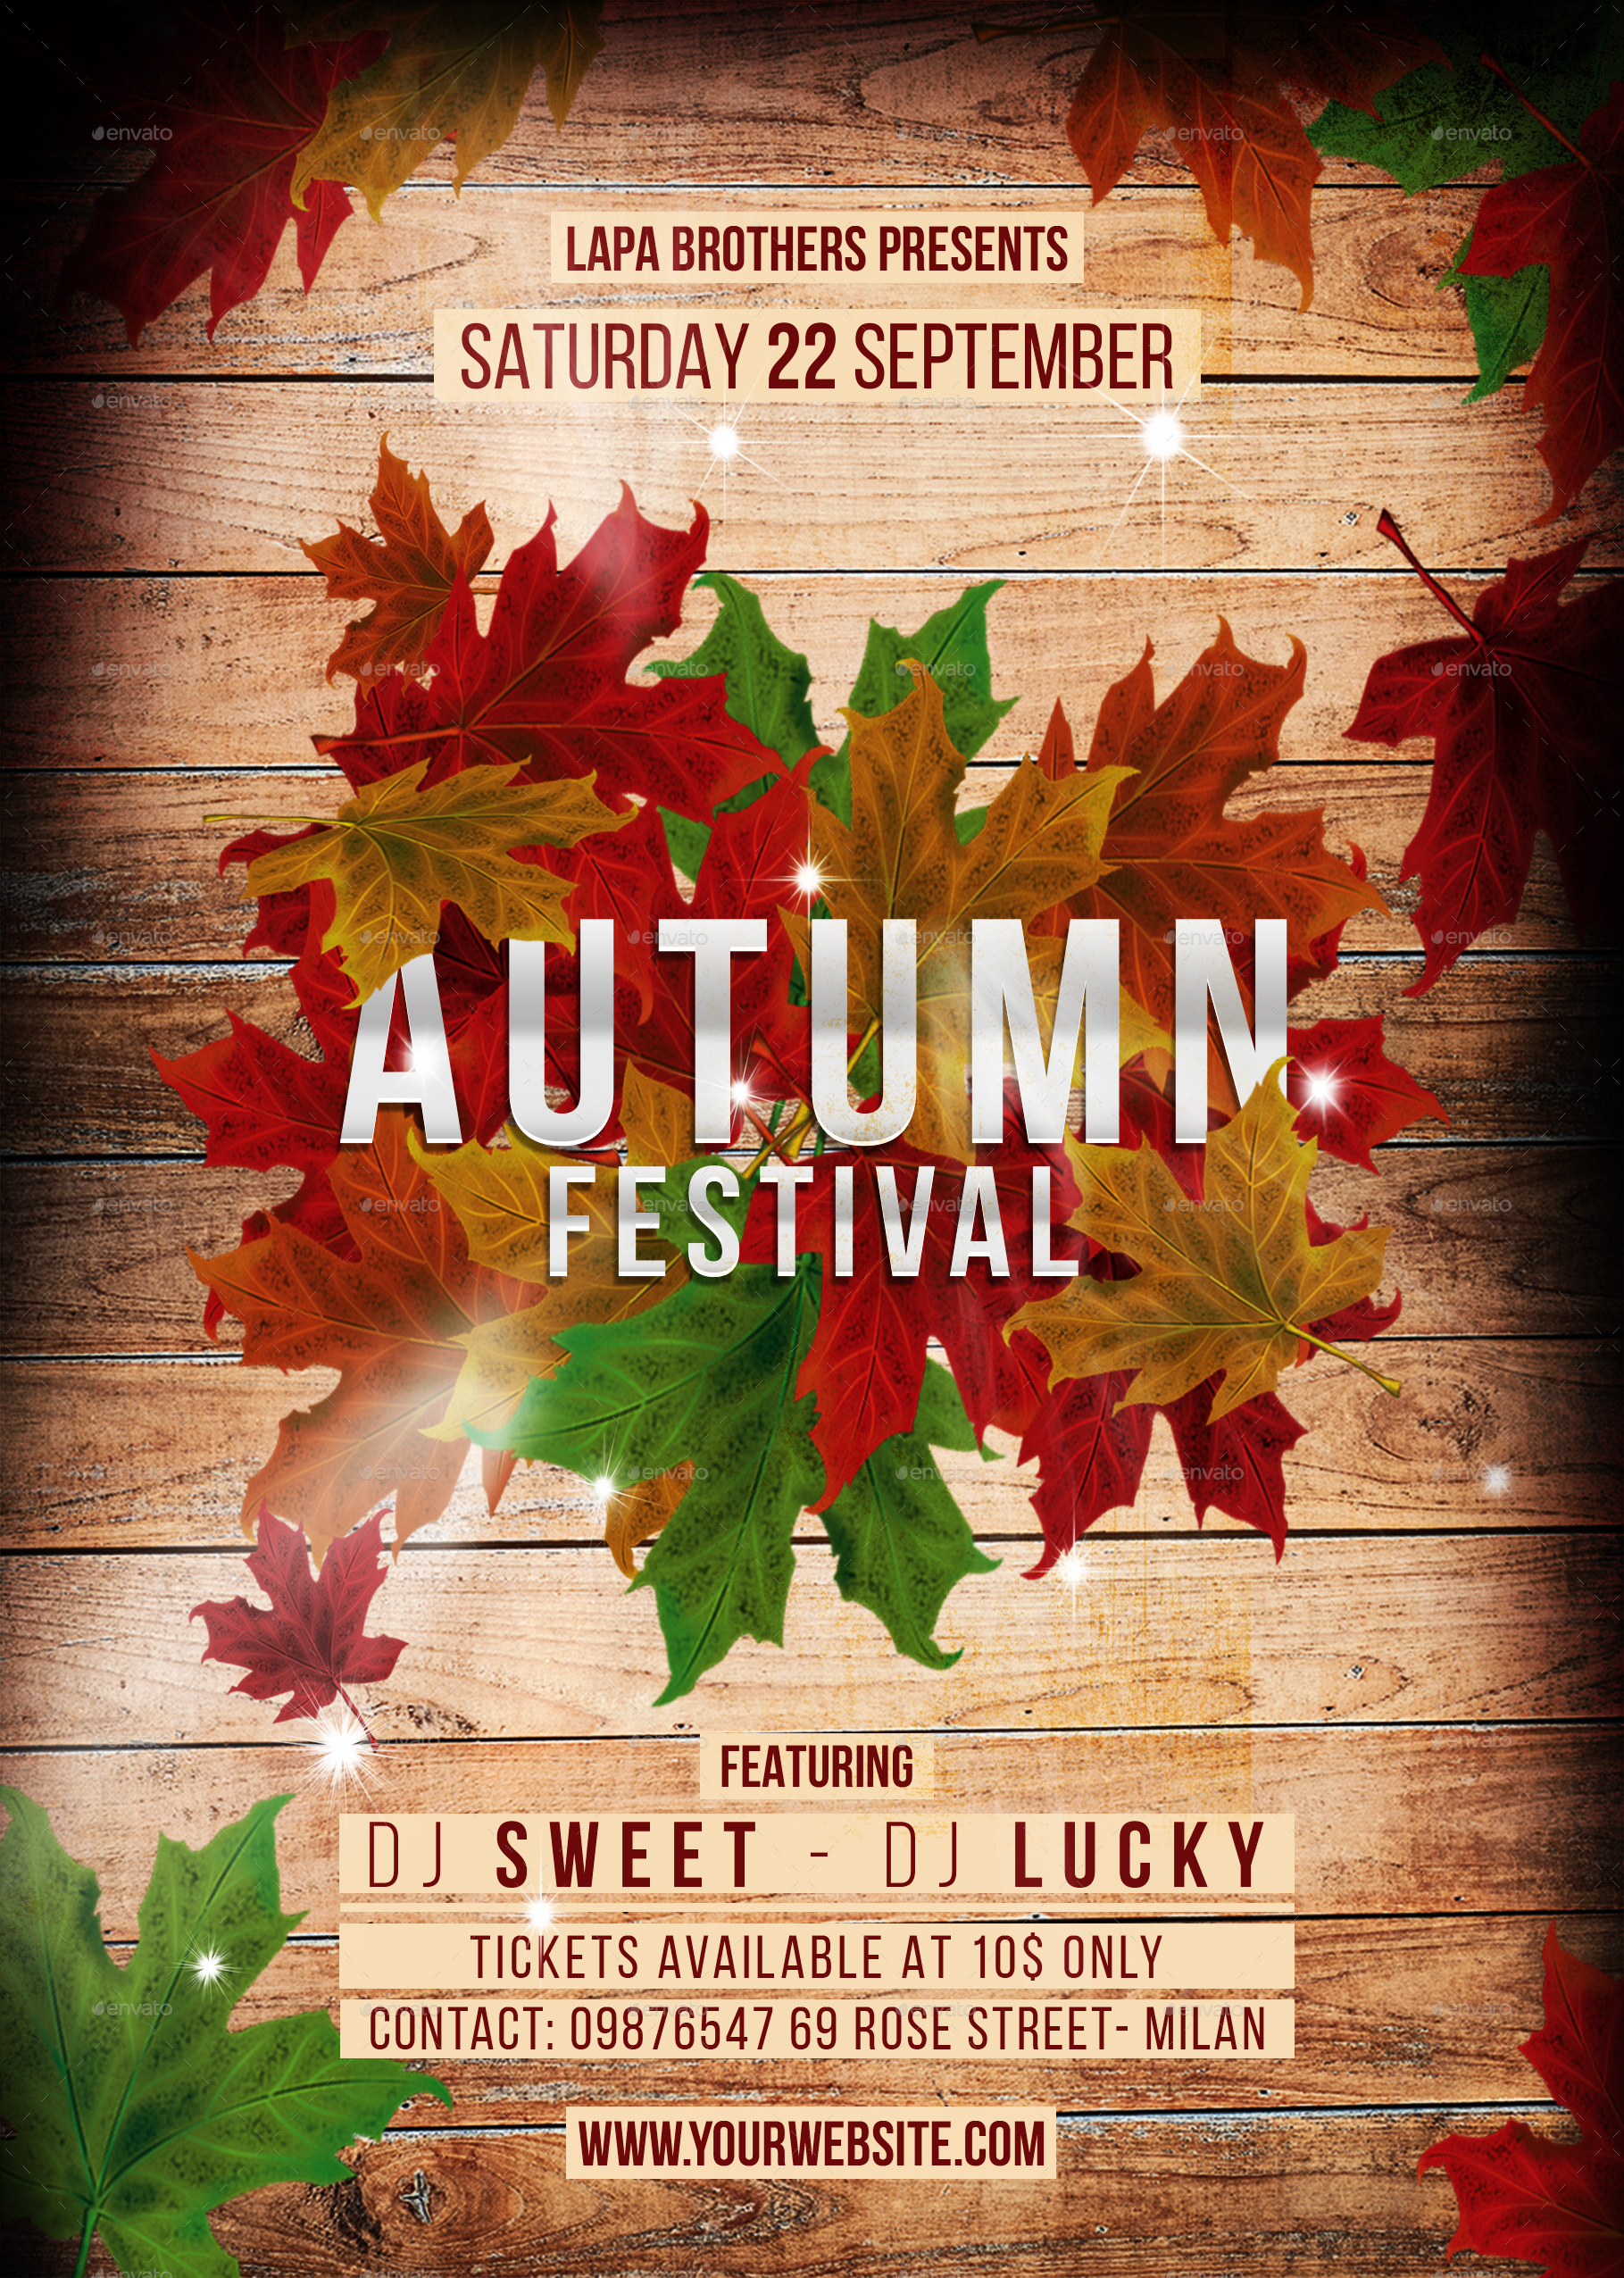 Autumn Festival Flyer Template by Lapabrothers GraphicRiver